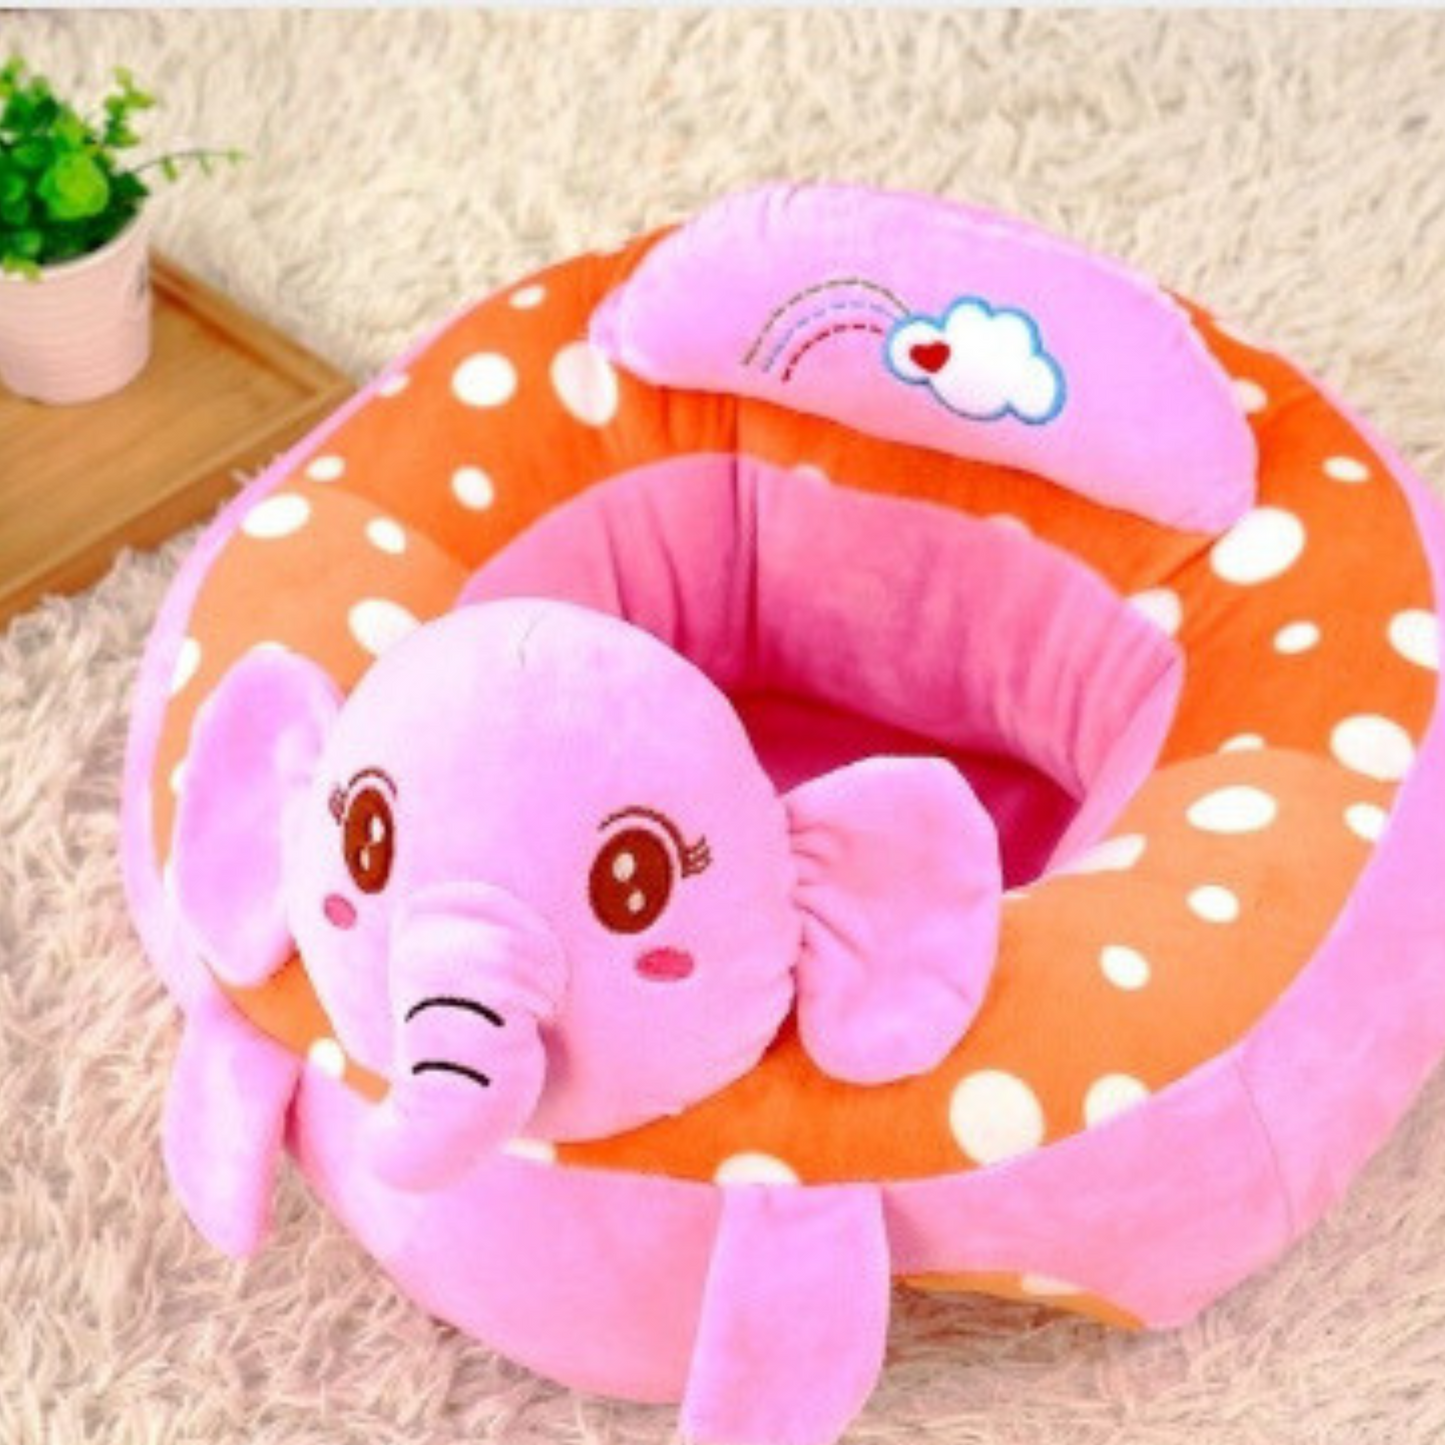 Child-friendly-learning-seat-with-playful-design